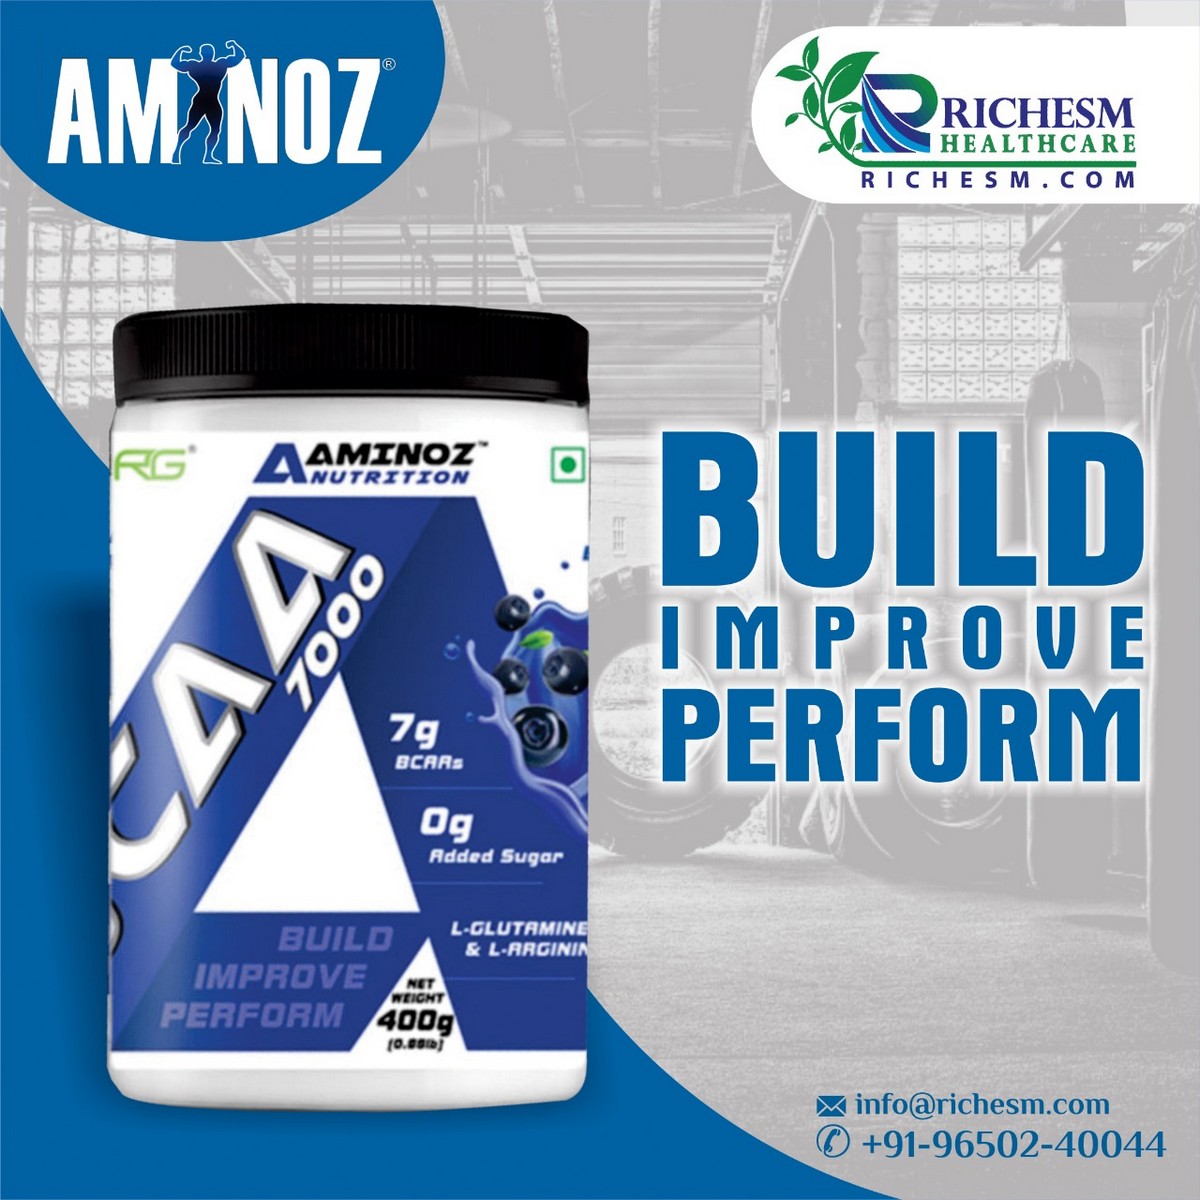 Improve Workout Endurance Performanceand Agility with Aminoz Health and Nutrition Improve Workout Endurance Performanceand Agility with Aminoz